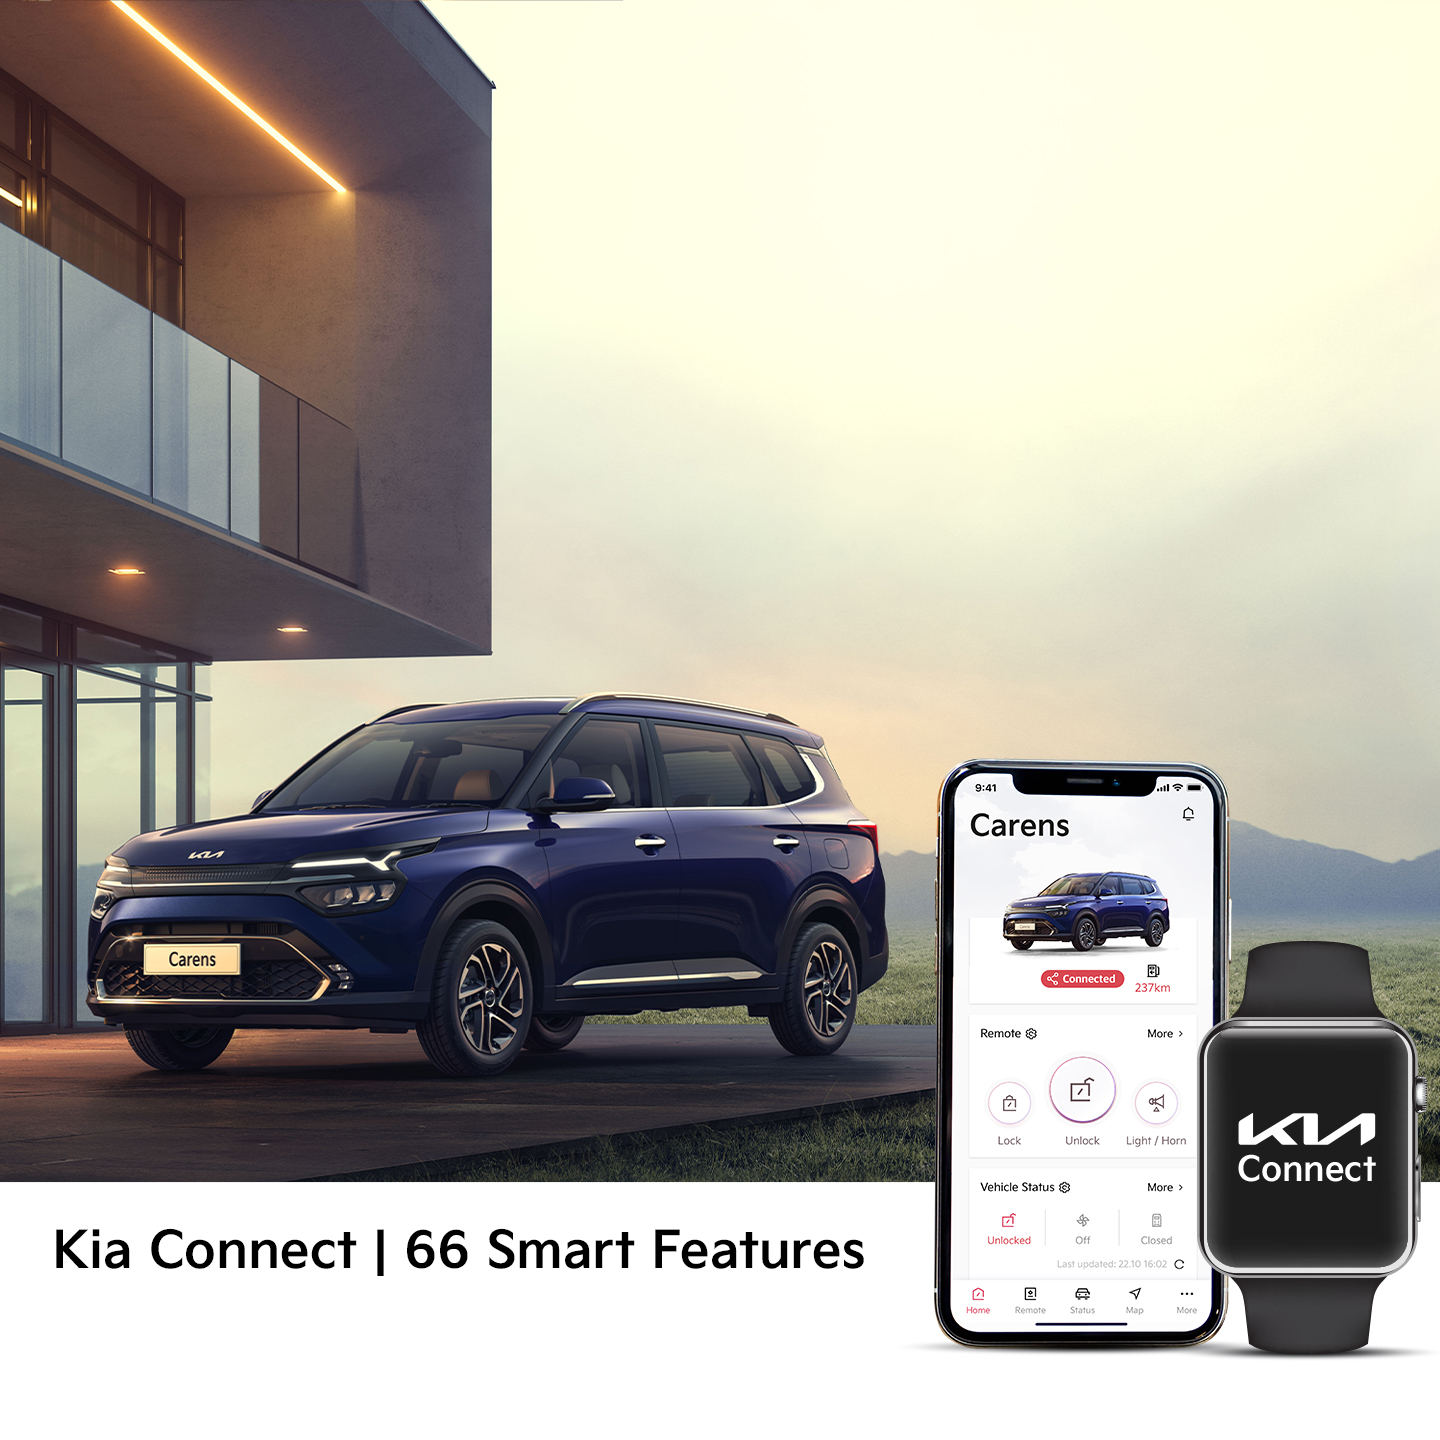 Kia Connect - 66 Smart Features
